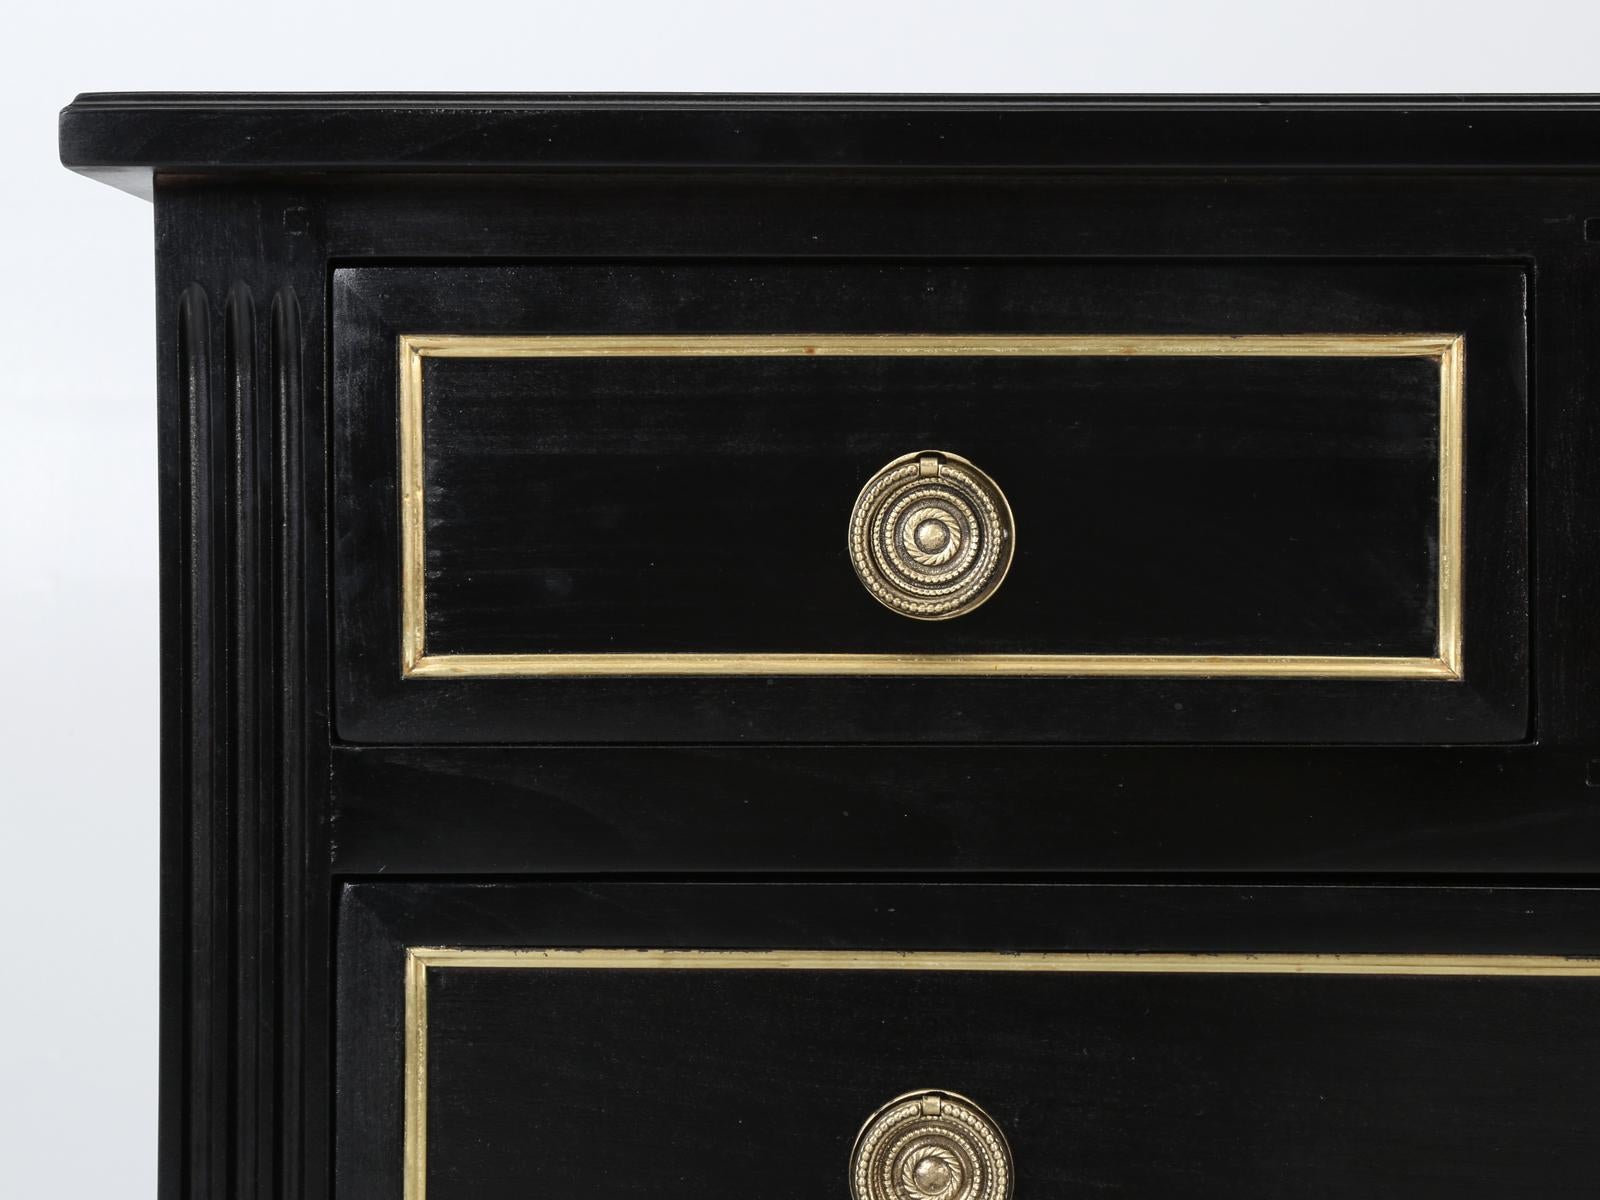 Mid-20th Century French Louis XVI Style Commode or Dresser in an Ebonized Black Finish